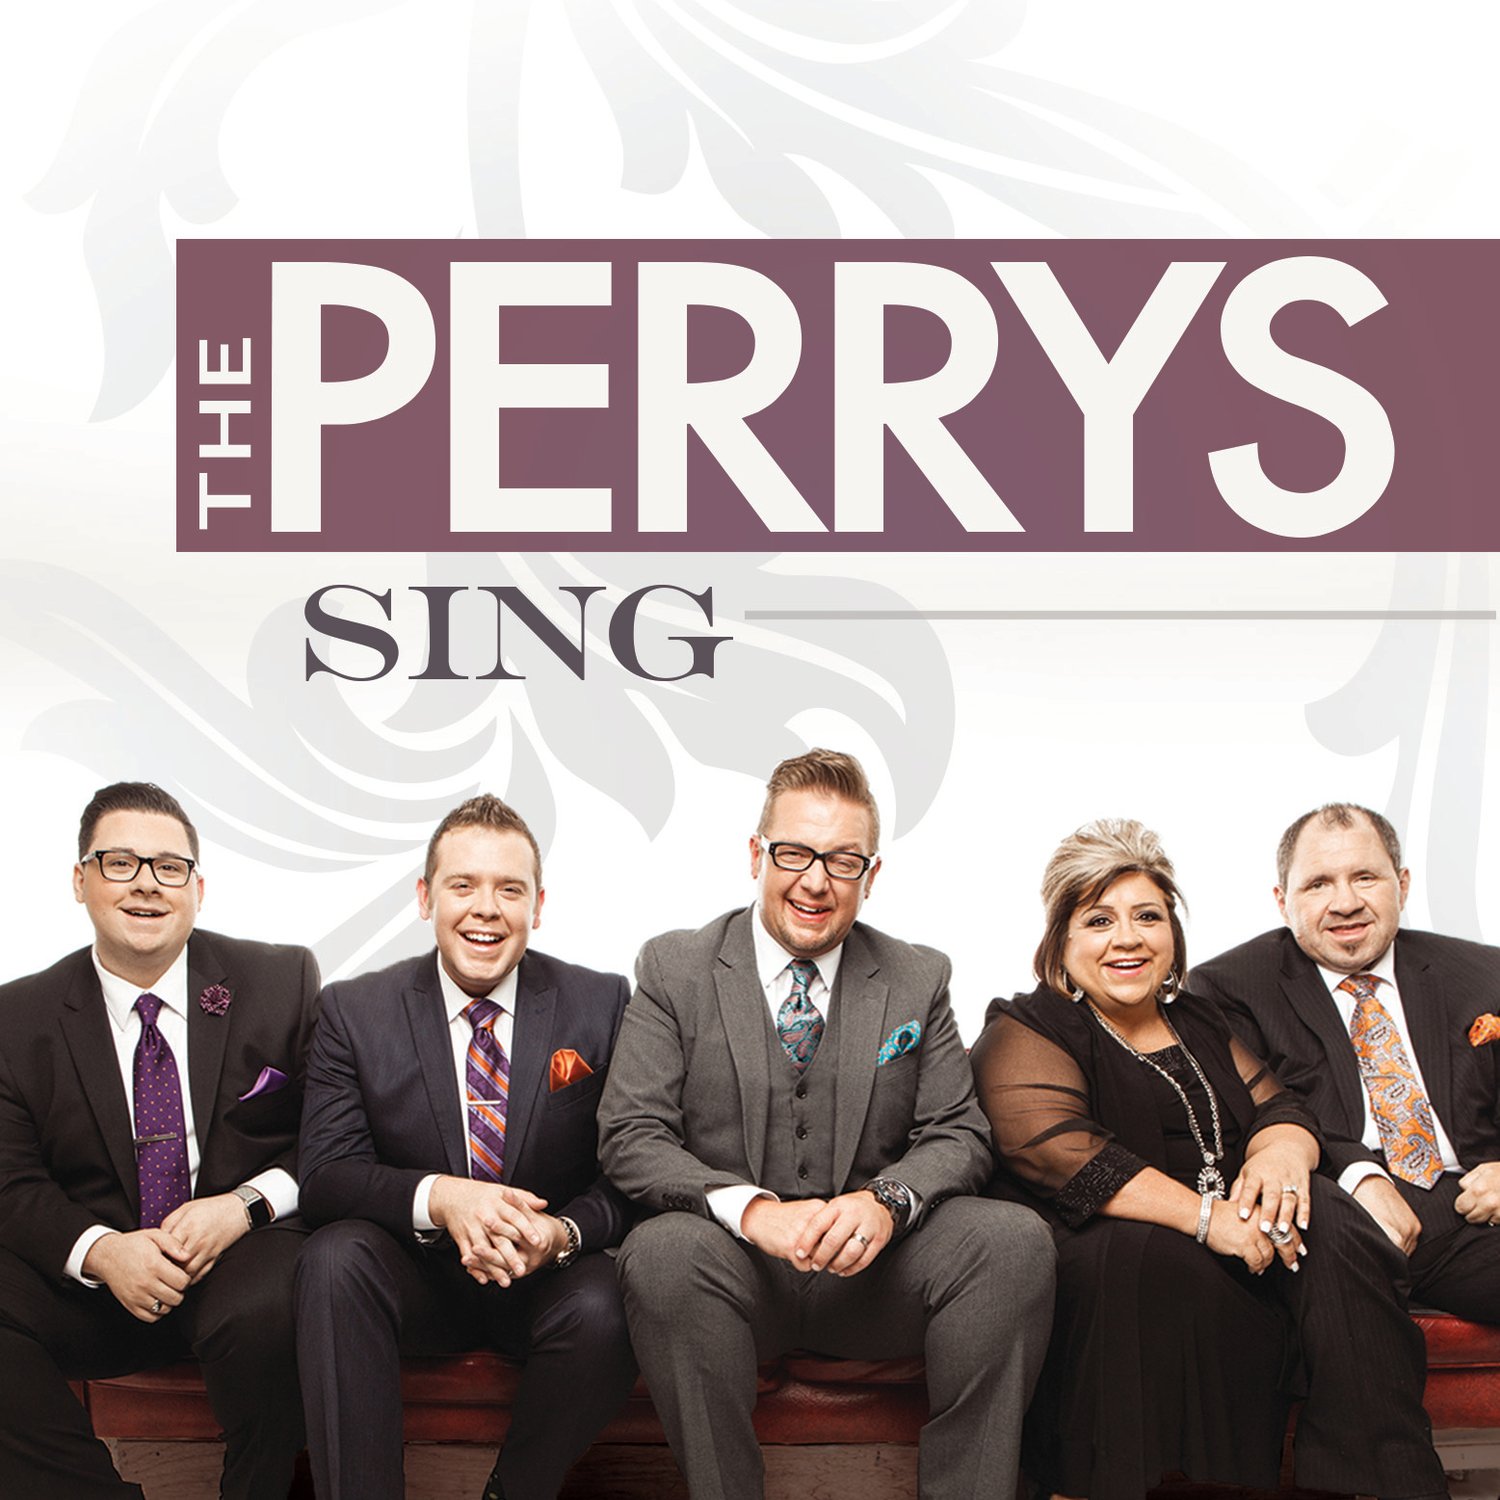 Art for Sing by The Perrys